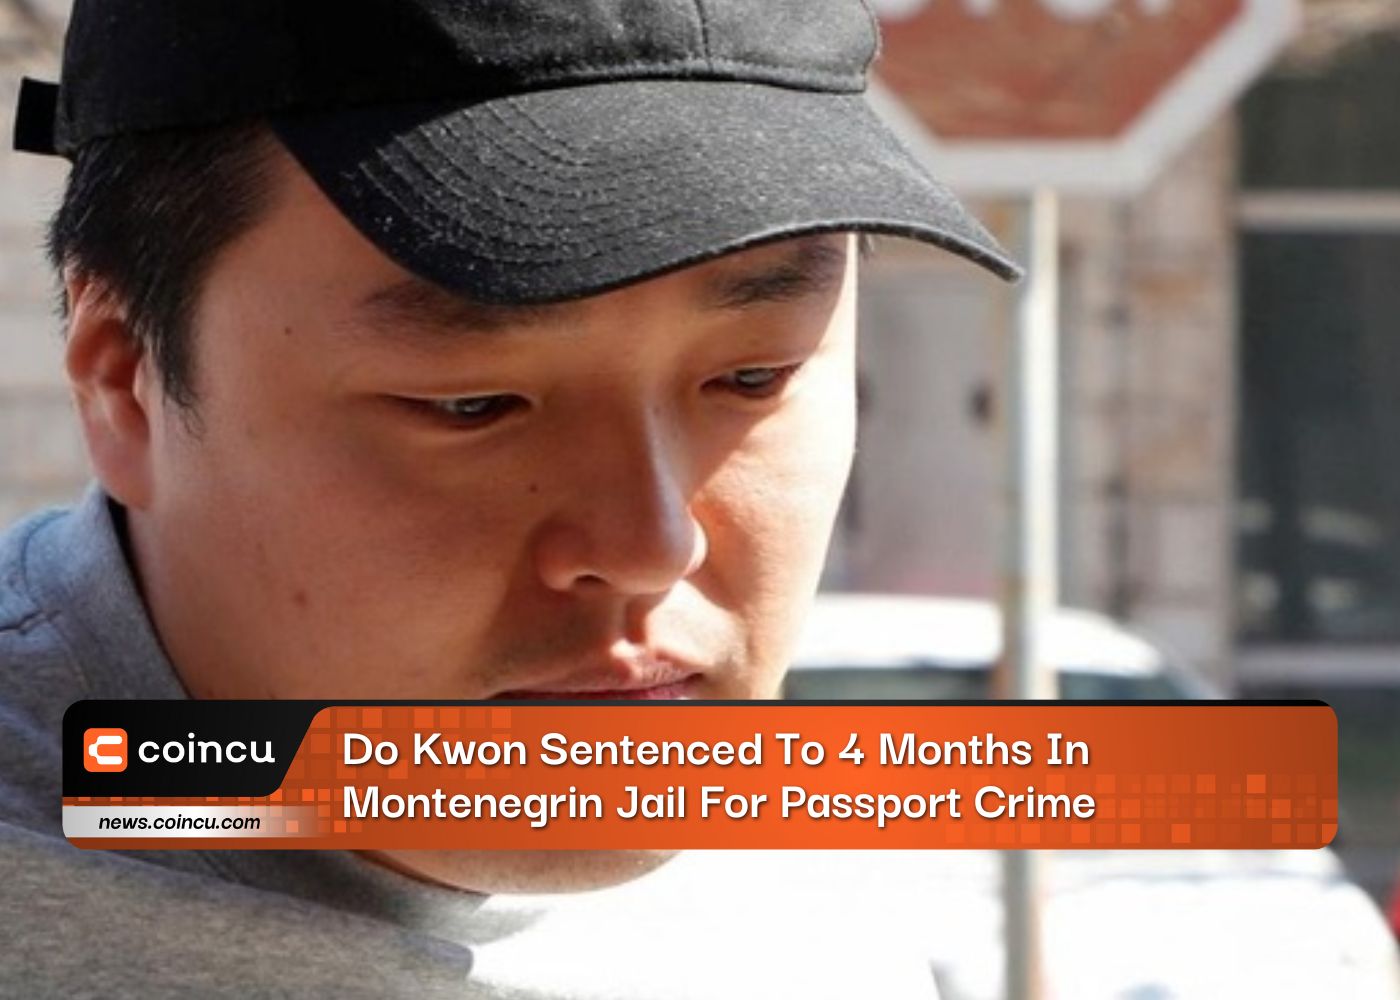 Do Kwon Sentenced To 4 Months In Montenegrin Jail For Passport Crime